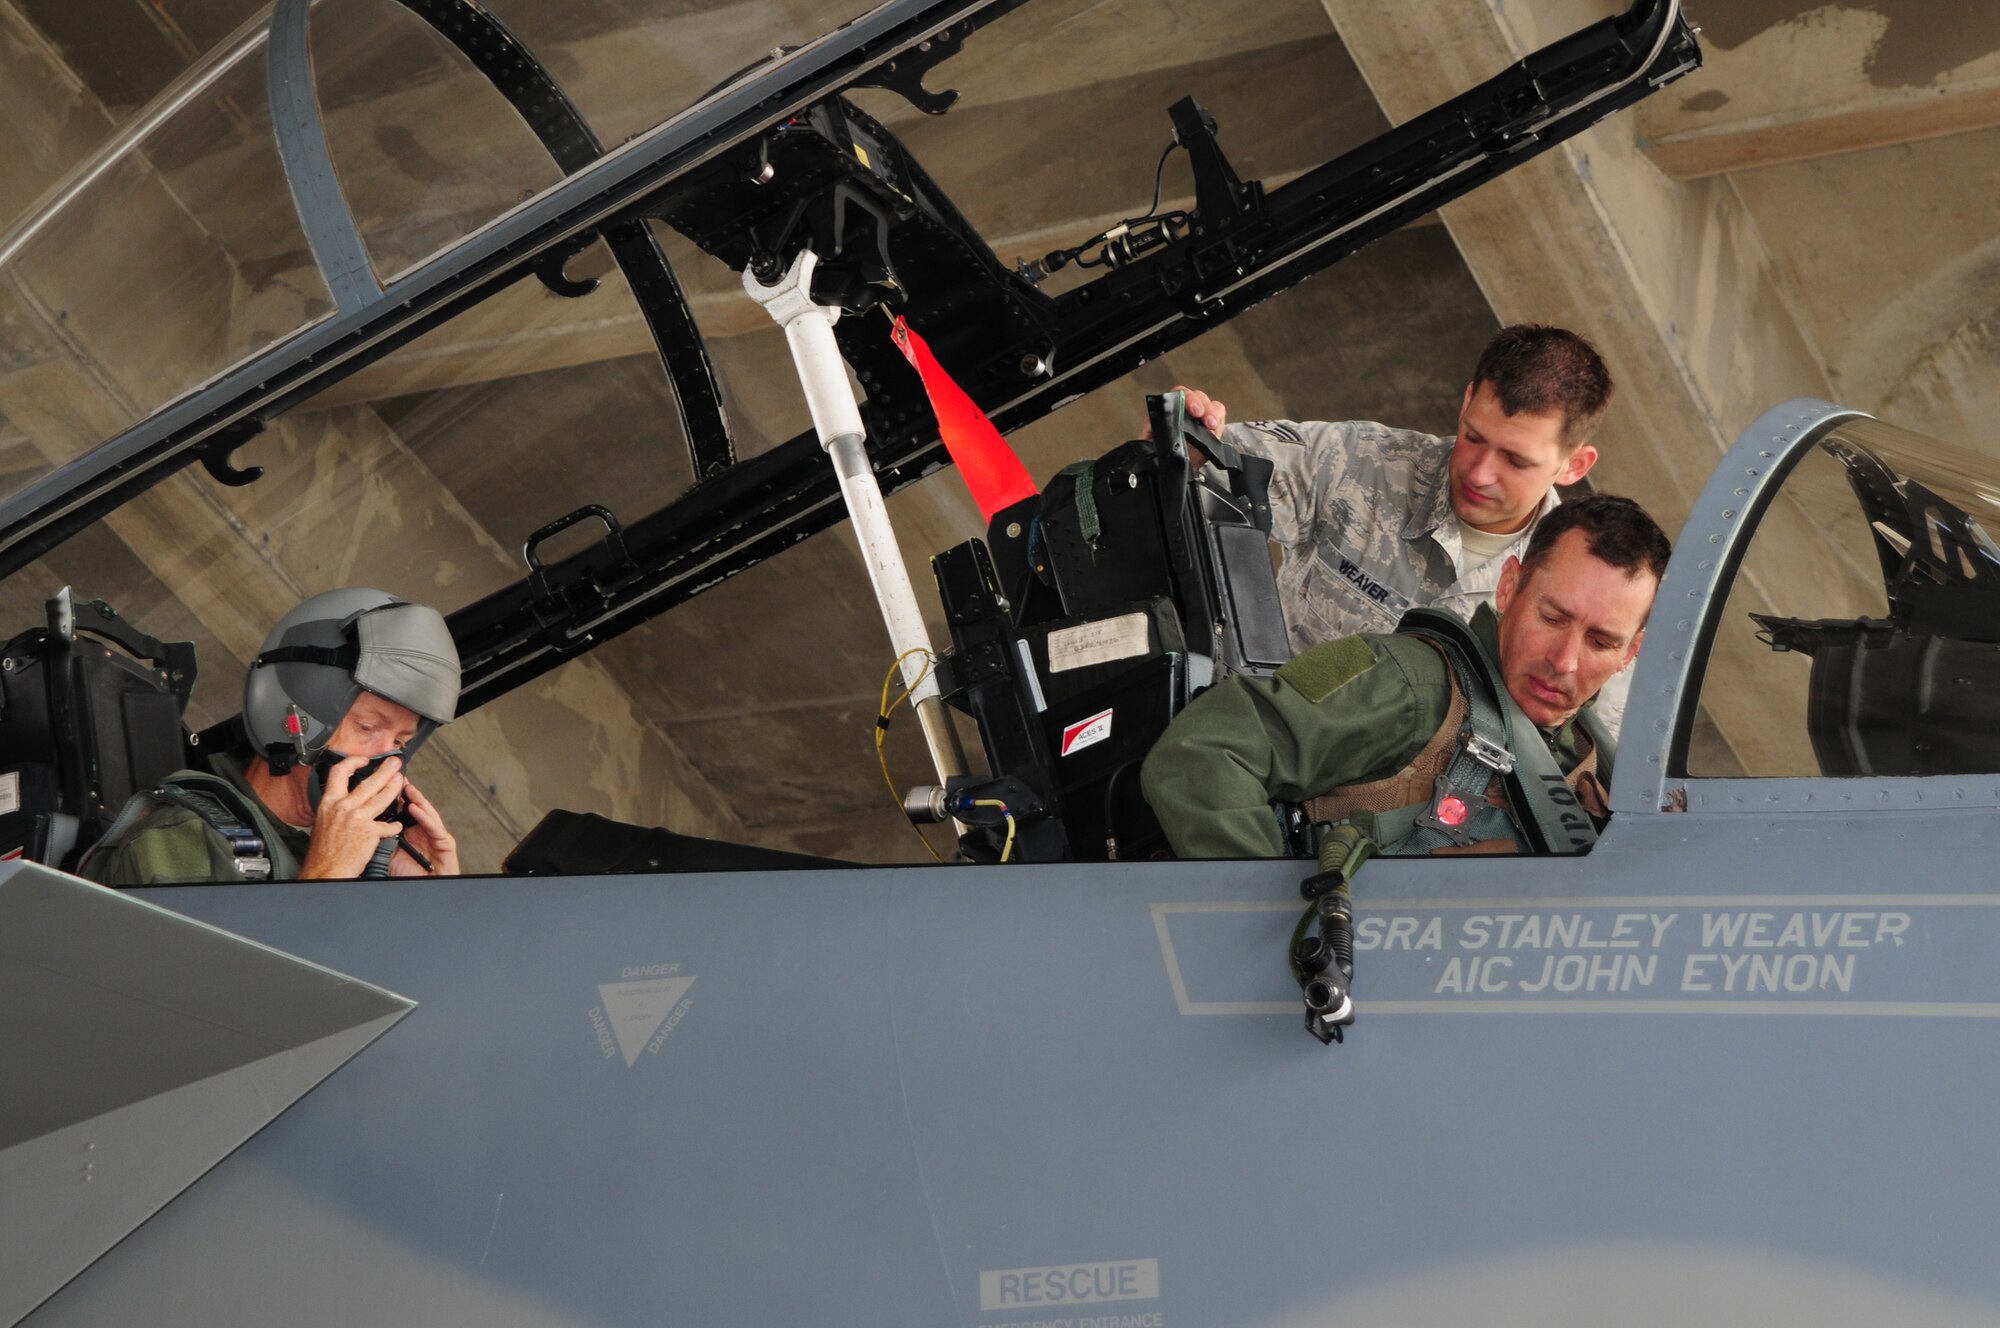 18th Wing Commander Brig. Gen. Brett Williams and Command Chief Master Sgt. Michael Warner get ready to fly during an F-15 familiarization flight as Senior Airman Stanley Weaver, a Crew Chief from the 18th Aircraft Maintenance Squadron, ensures everything is properly secured, May 27. (U.S. Air Force photo/Staff Sgt. Lakisha Croley)